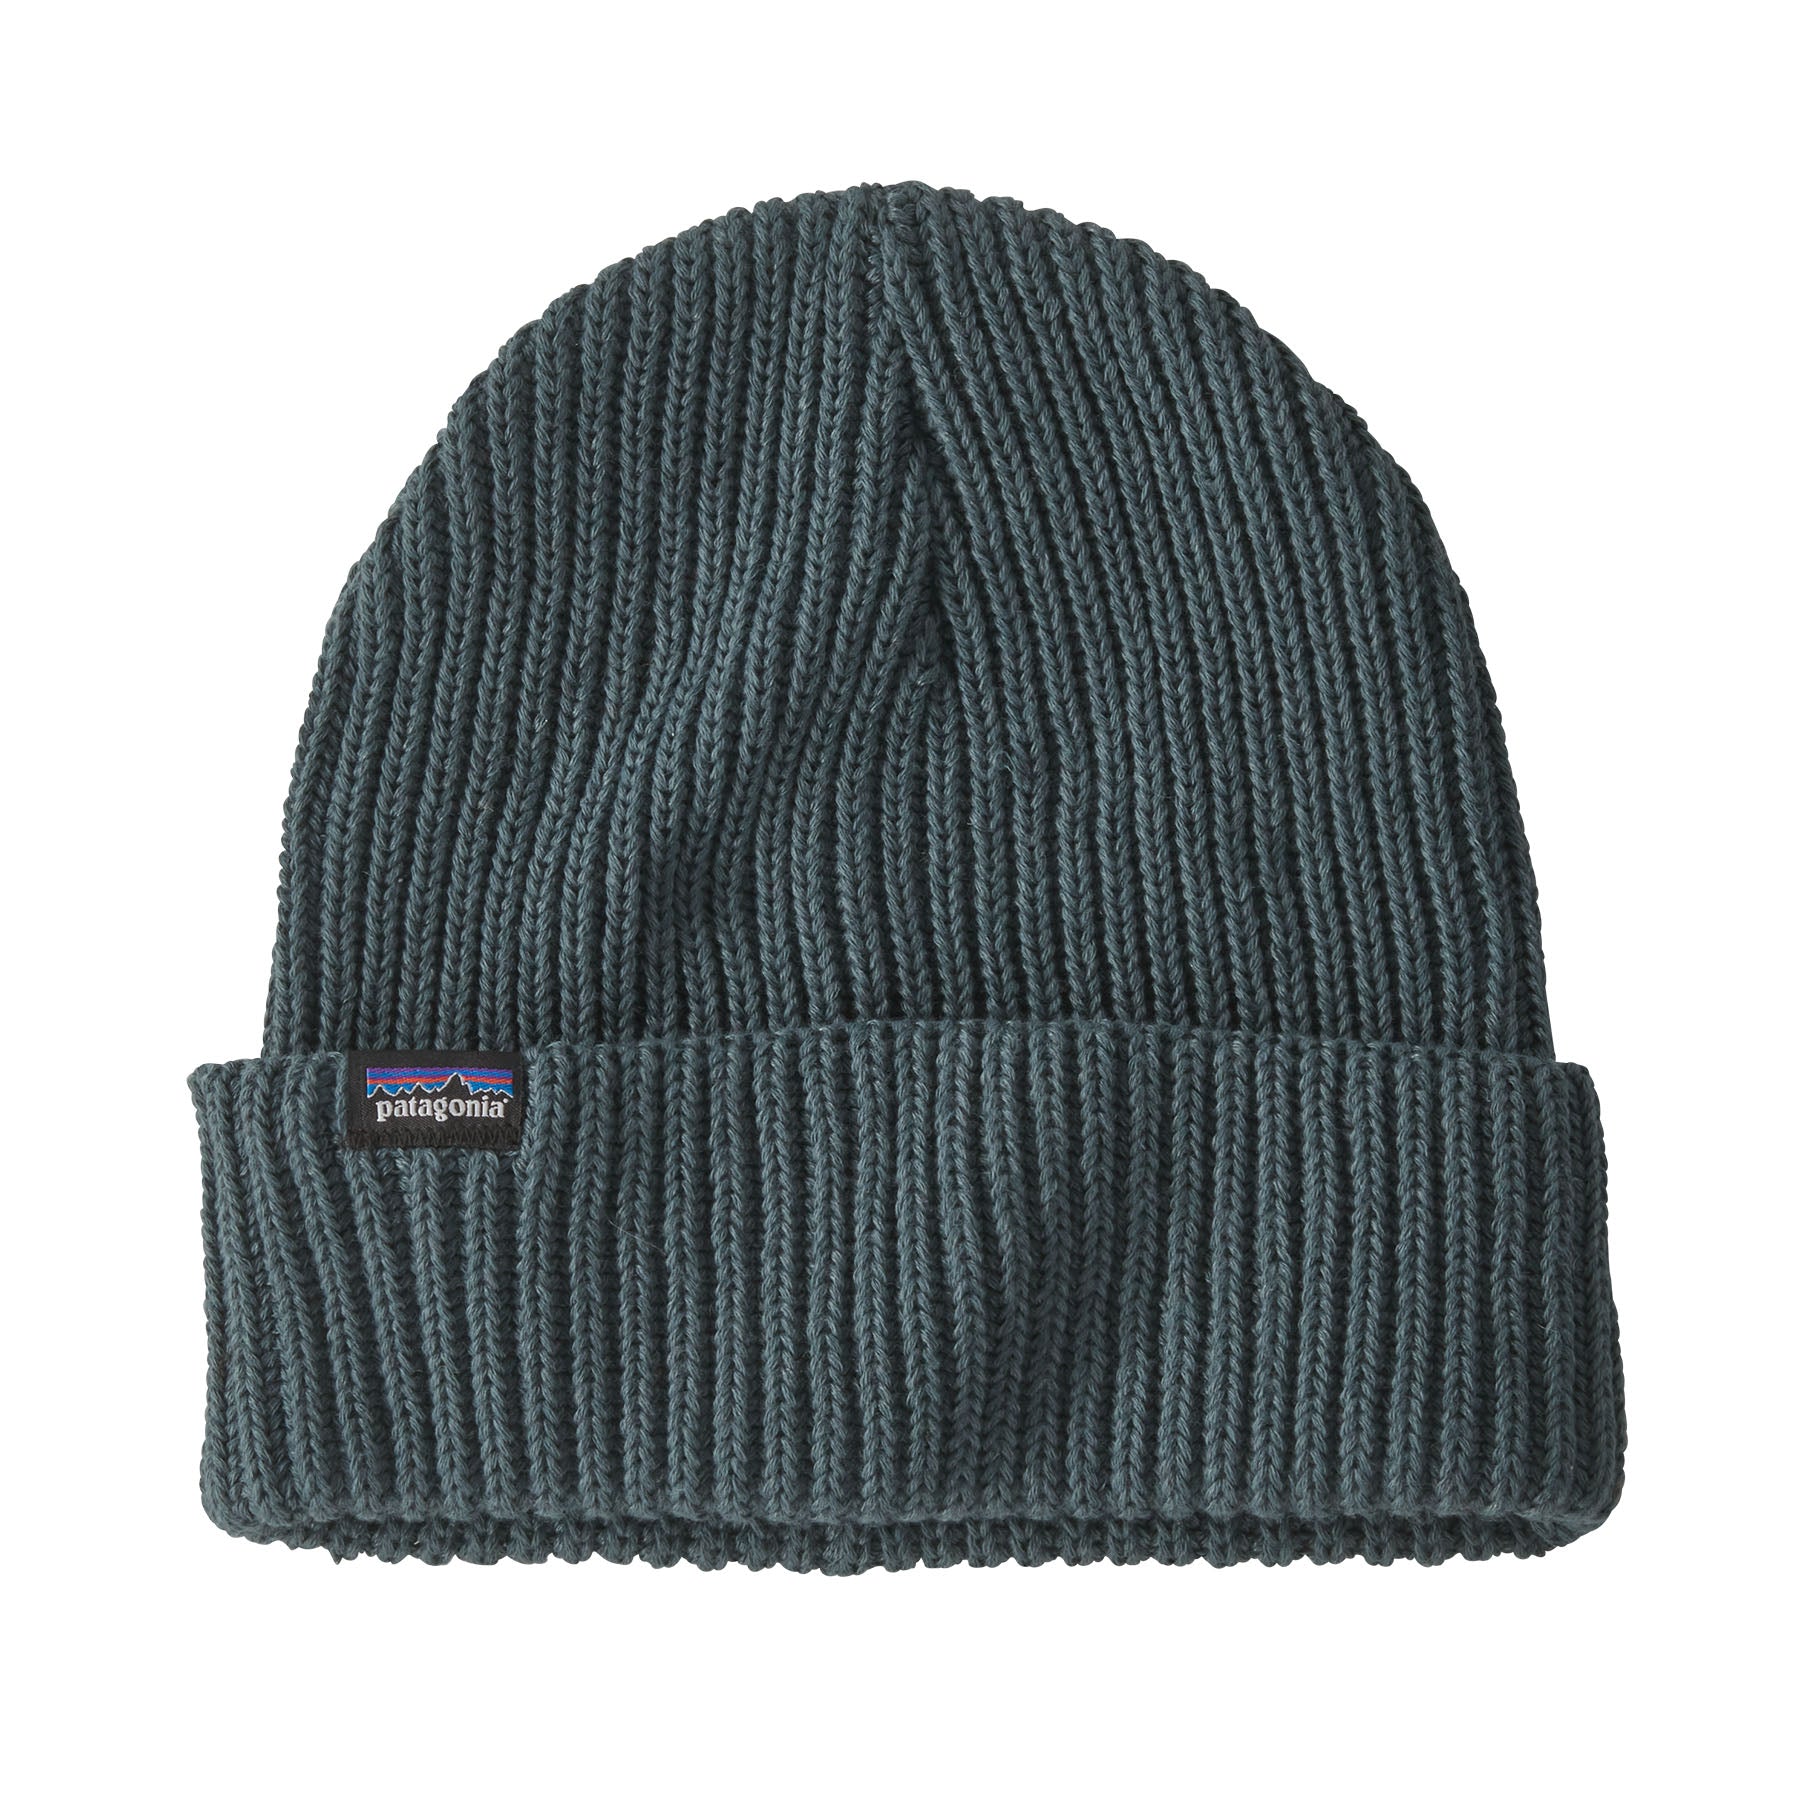 Fishermans Rolled Beanie — Native Outfitters Summit Adventure